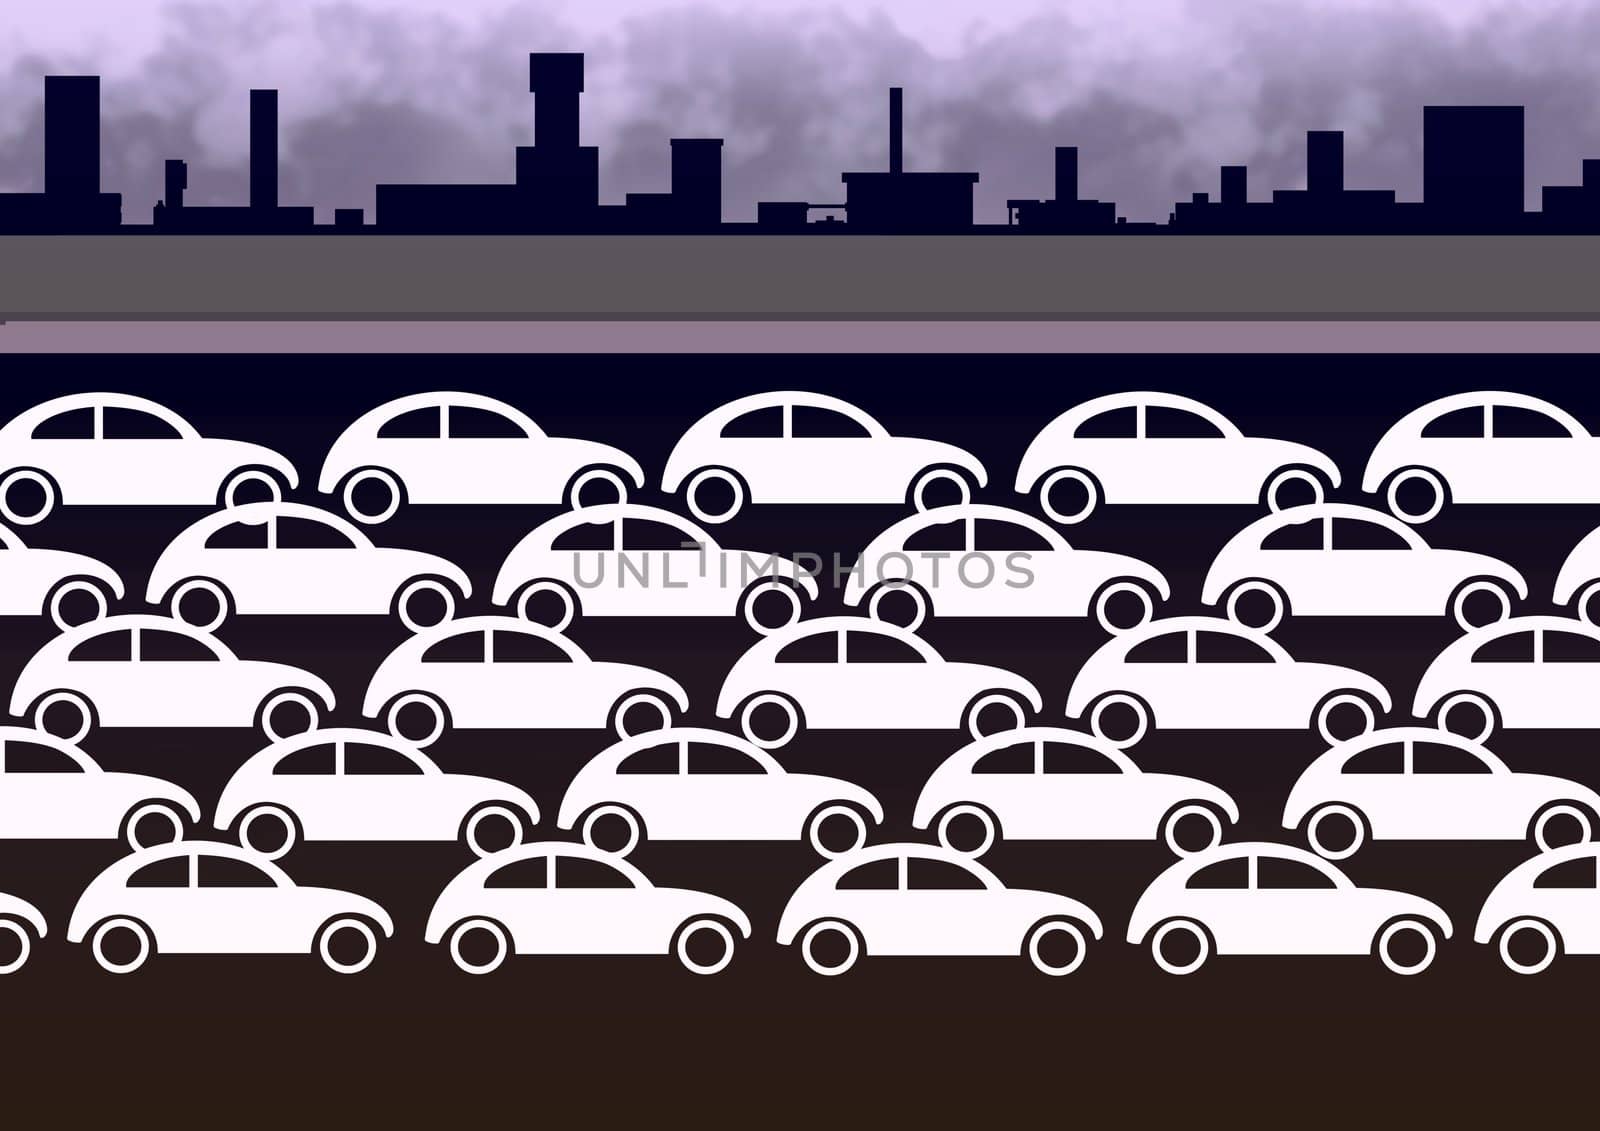 Illustration of lots of white cars on a urban background
